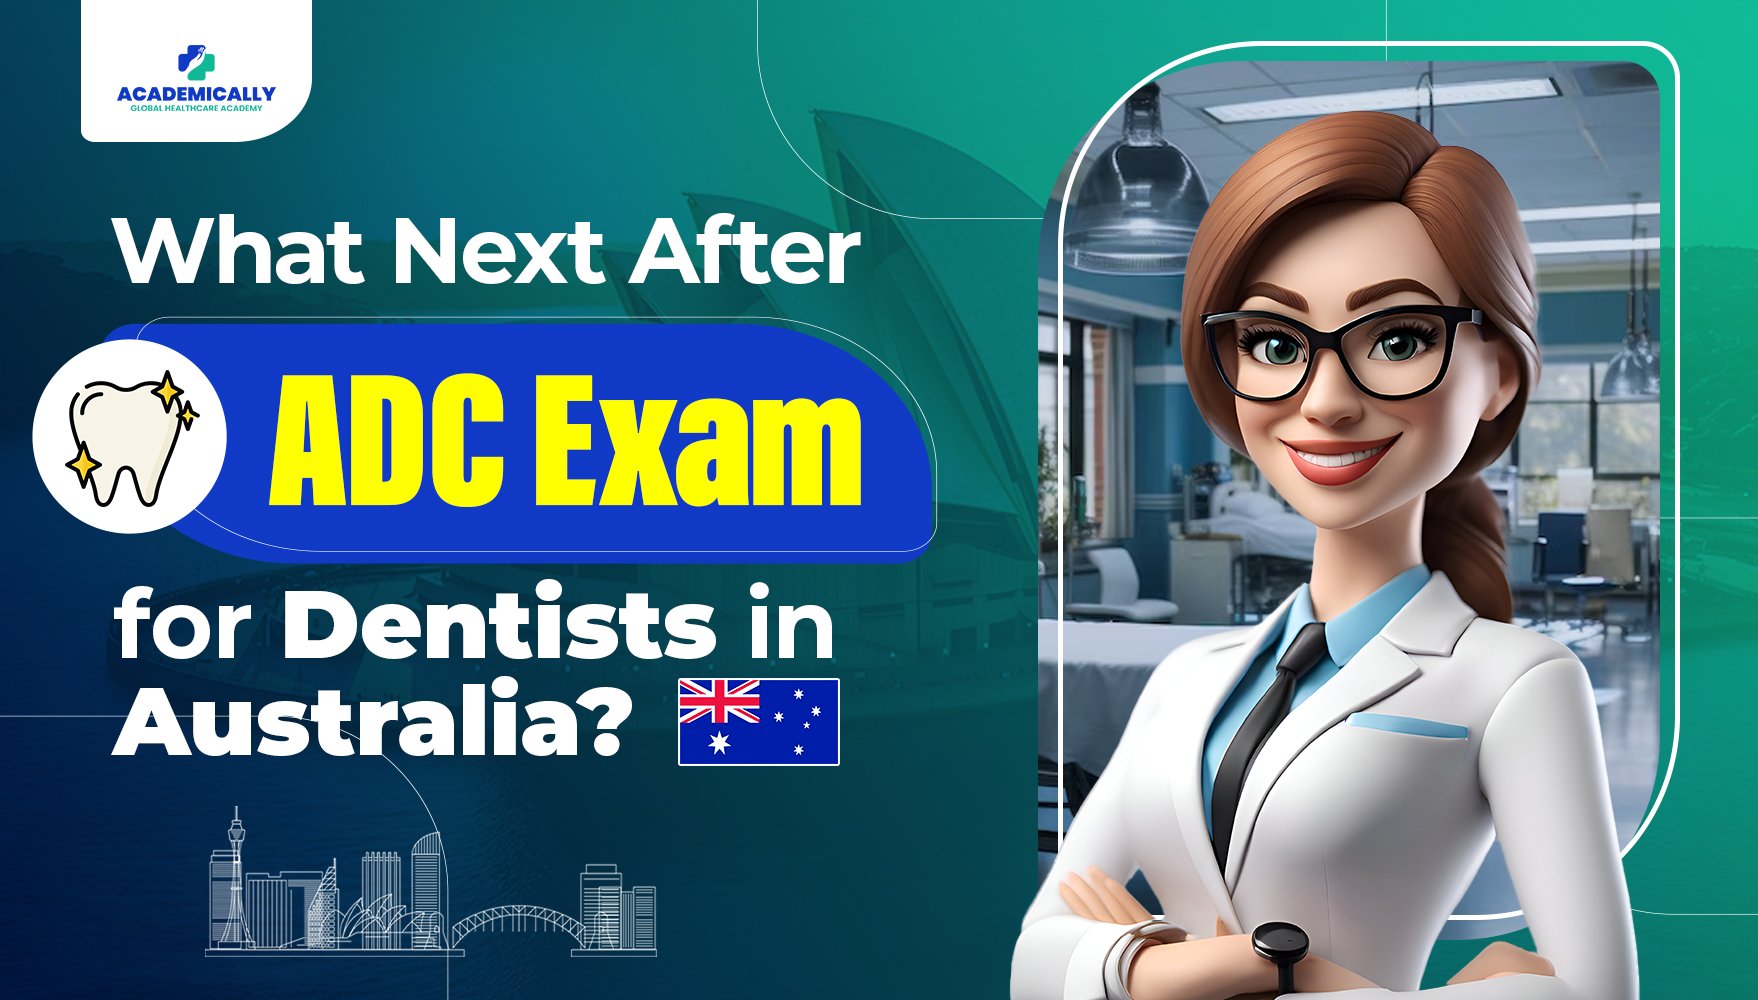 Dentist in Australia After ADC Exam